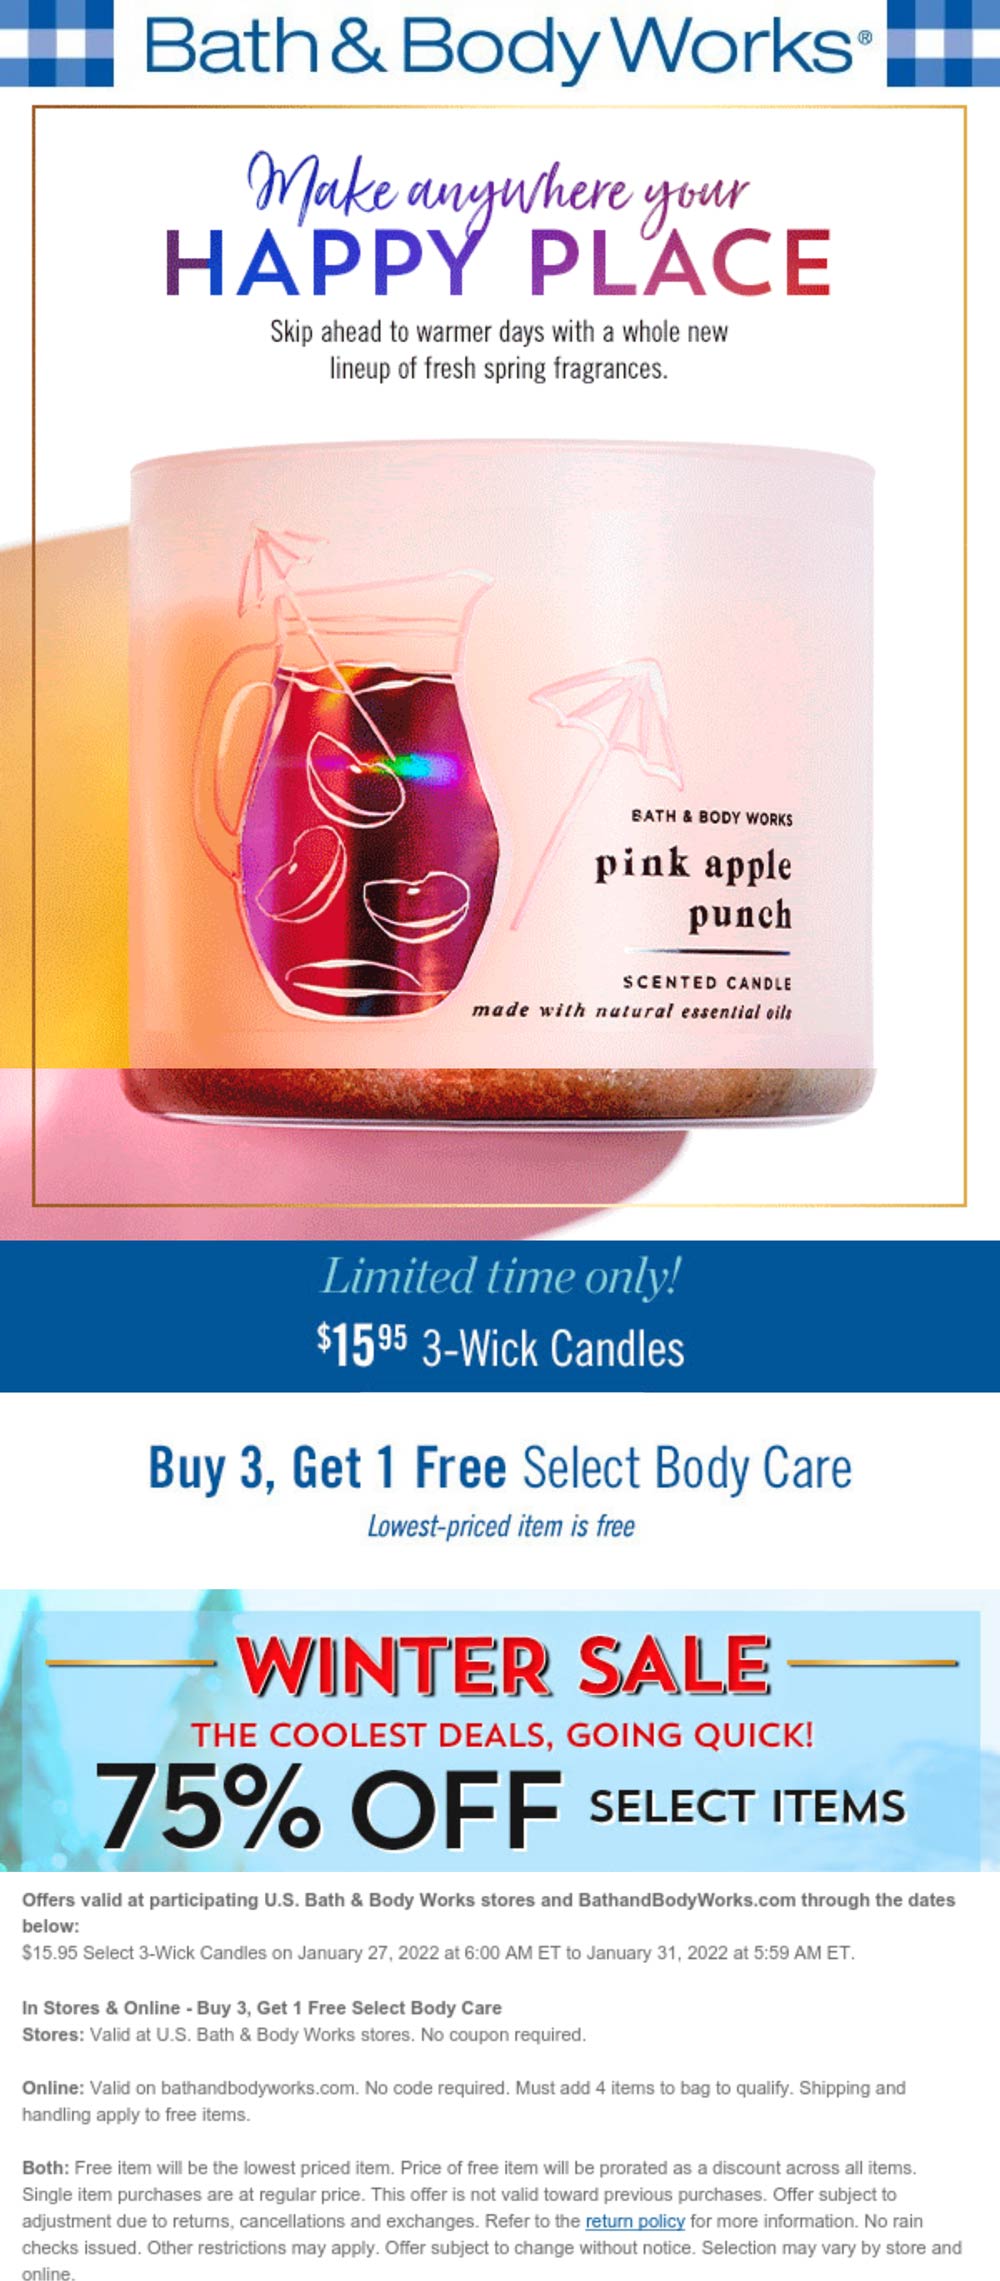 Bath & Body Works stores Coupon  4th body care free & $16 3-wick candles at Bath & Body Works, ditto online #bathbodyworks 